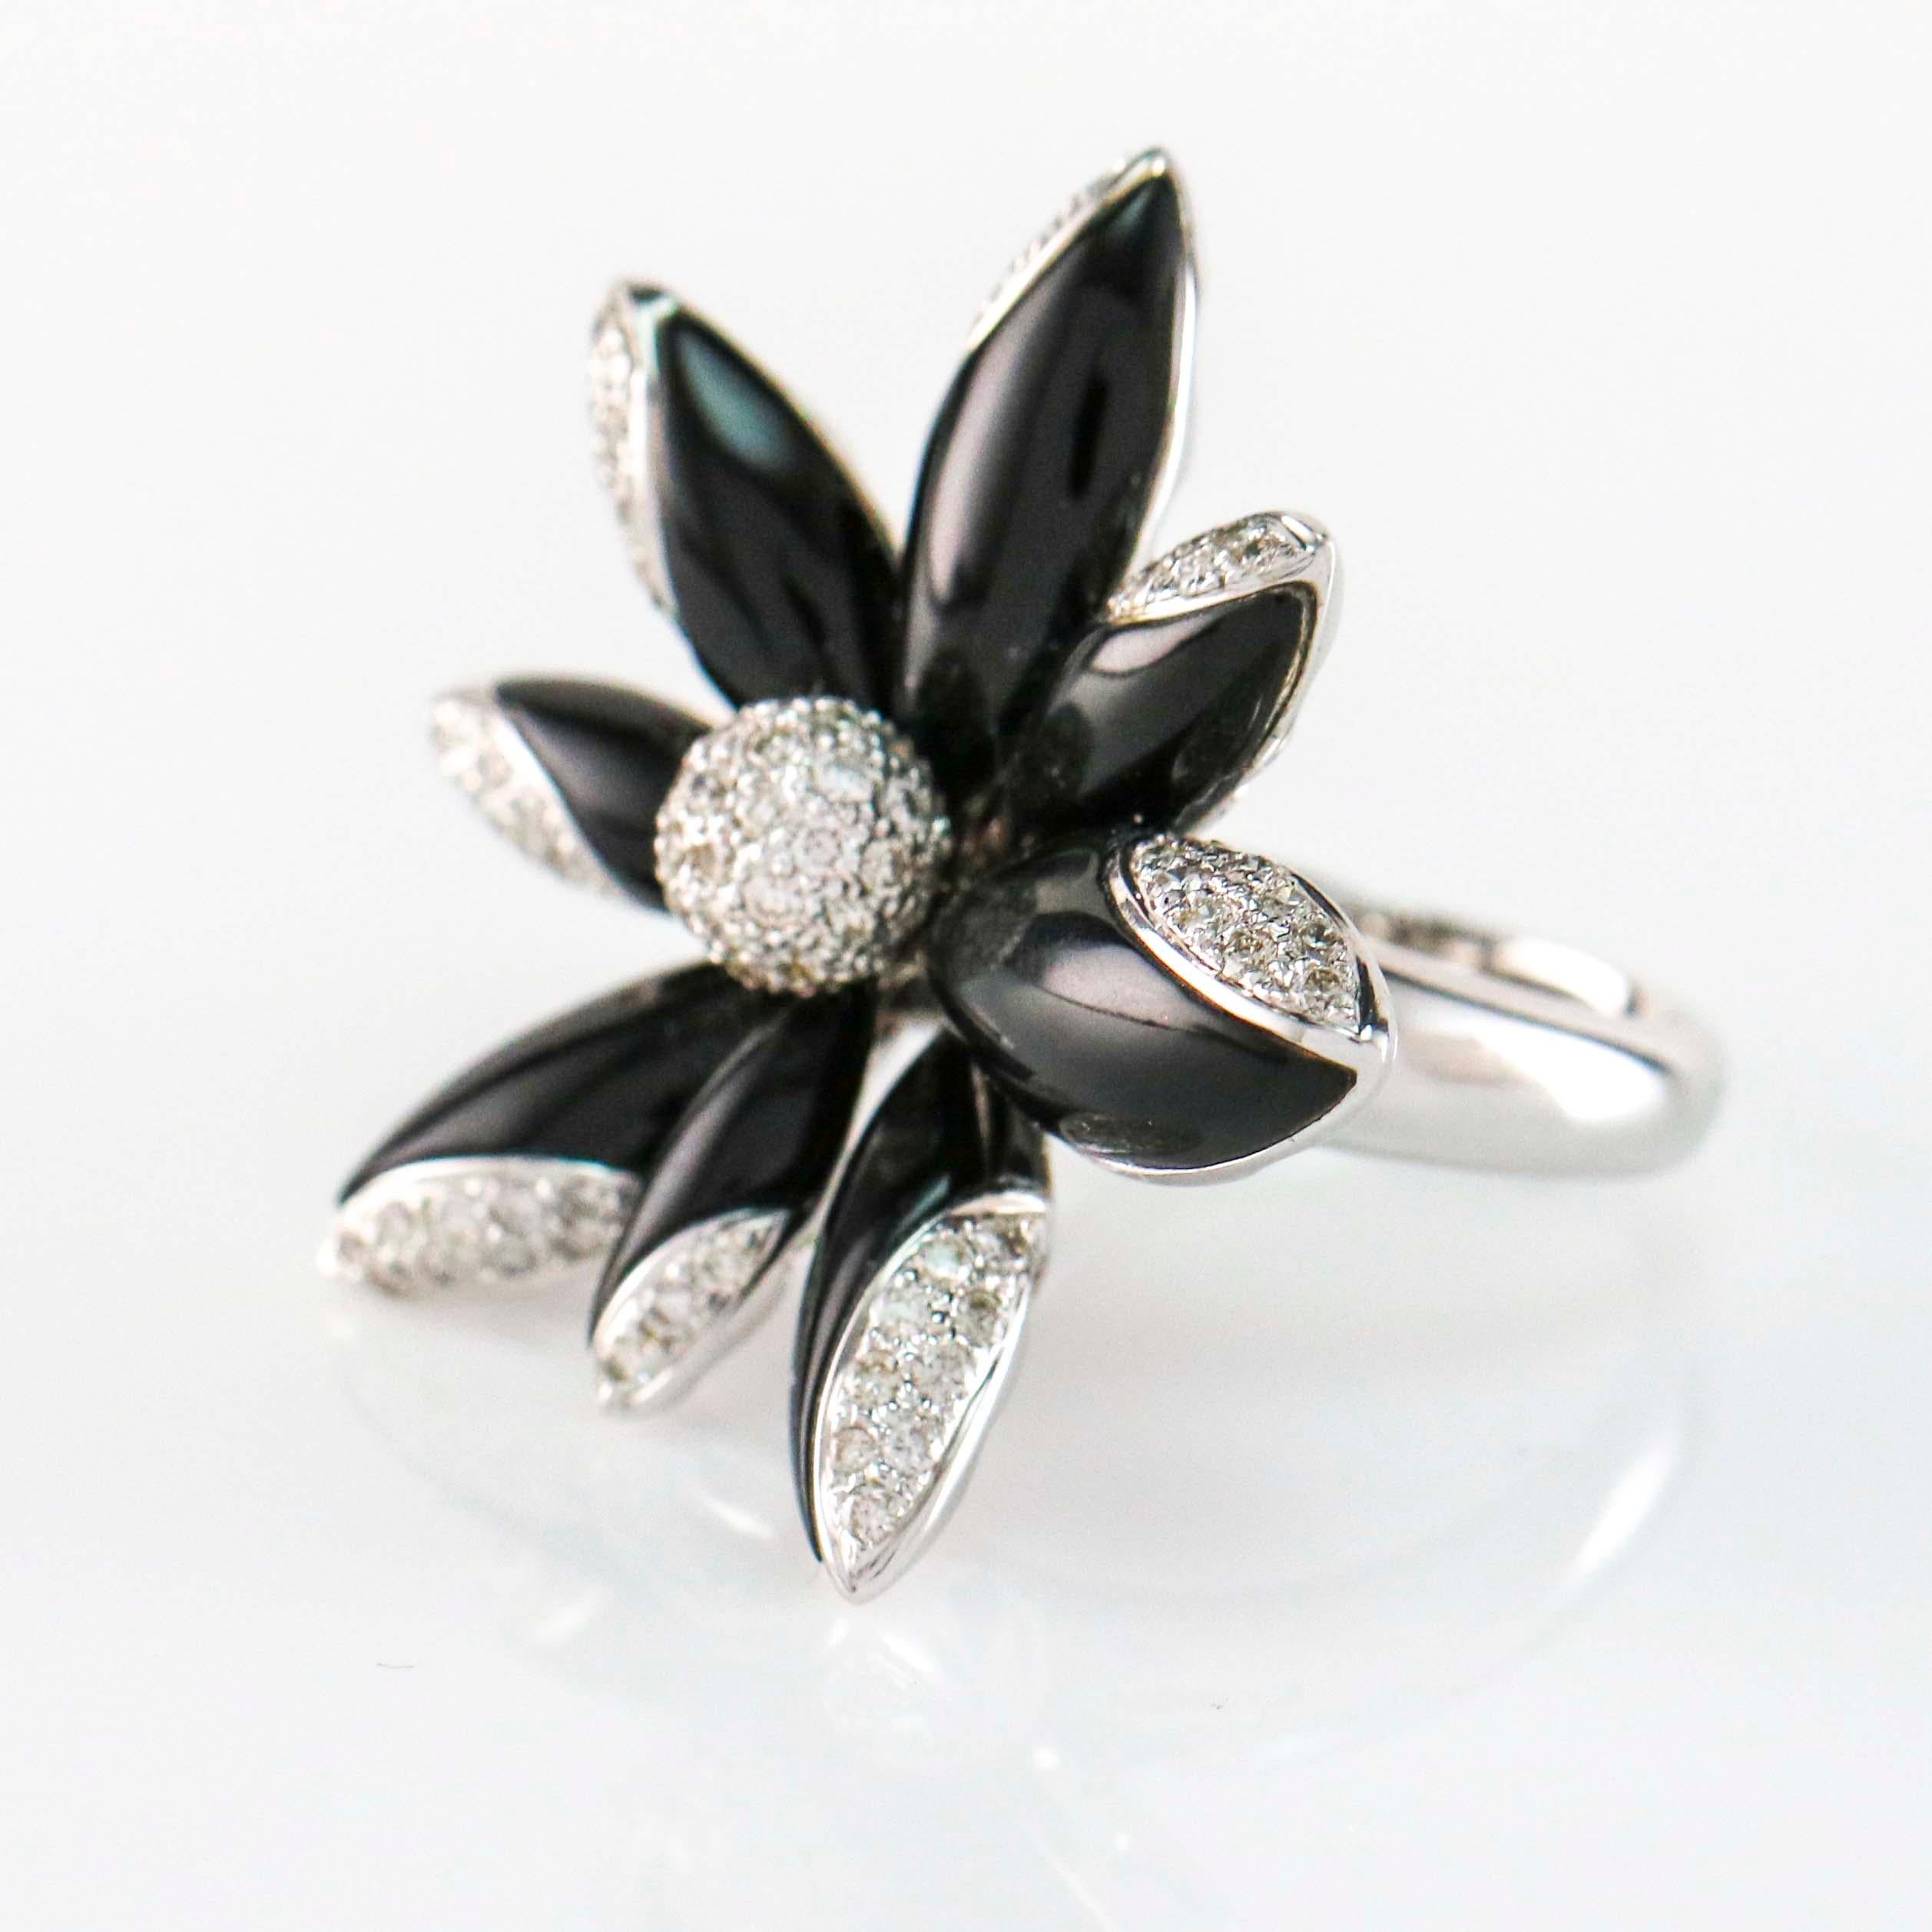 1.23 Carat Diamond Lily Onyx Flower 18 Karat White Gold Cocktail Ring In Excellent Condition For Sale In Fort Lauderdale, FL